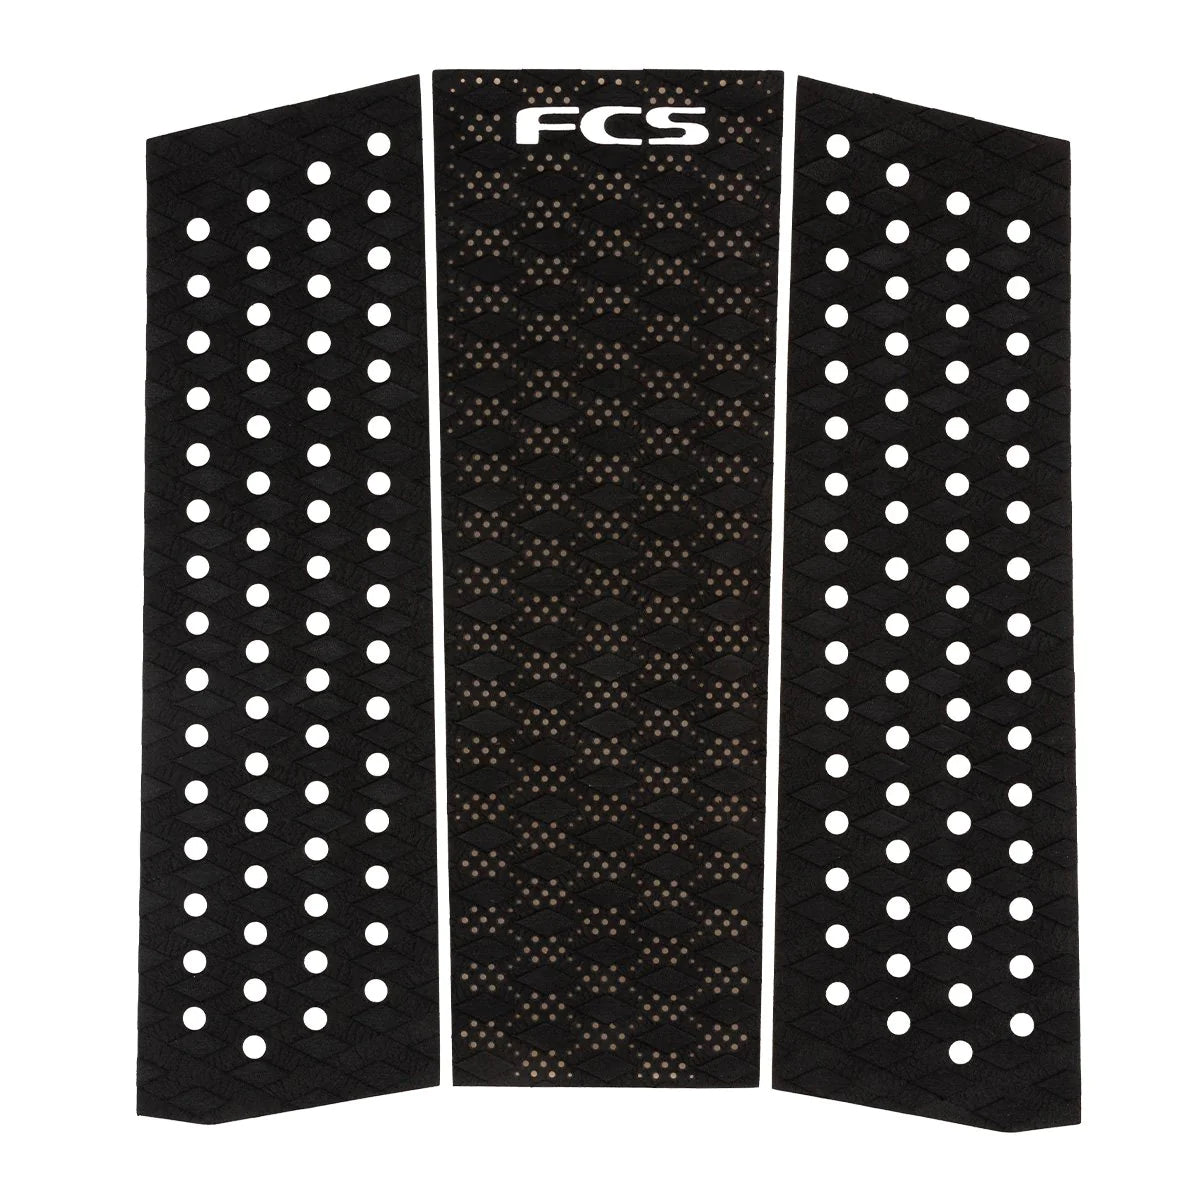 FCS T3 Mid Front Foot Surfboard Traction Pad - Black